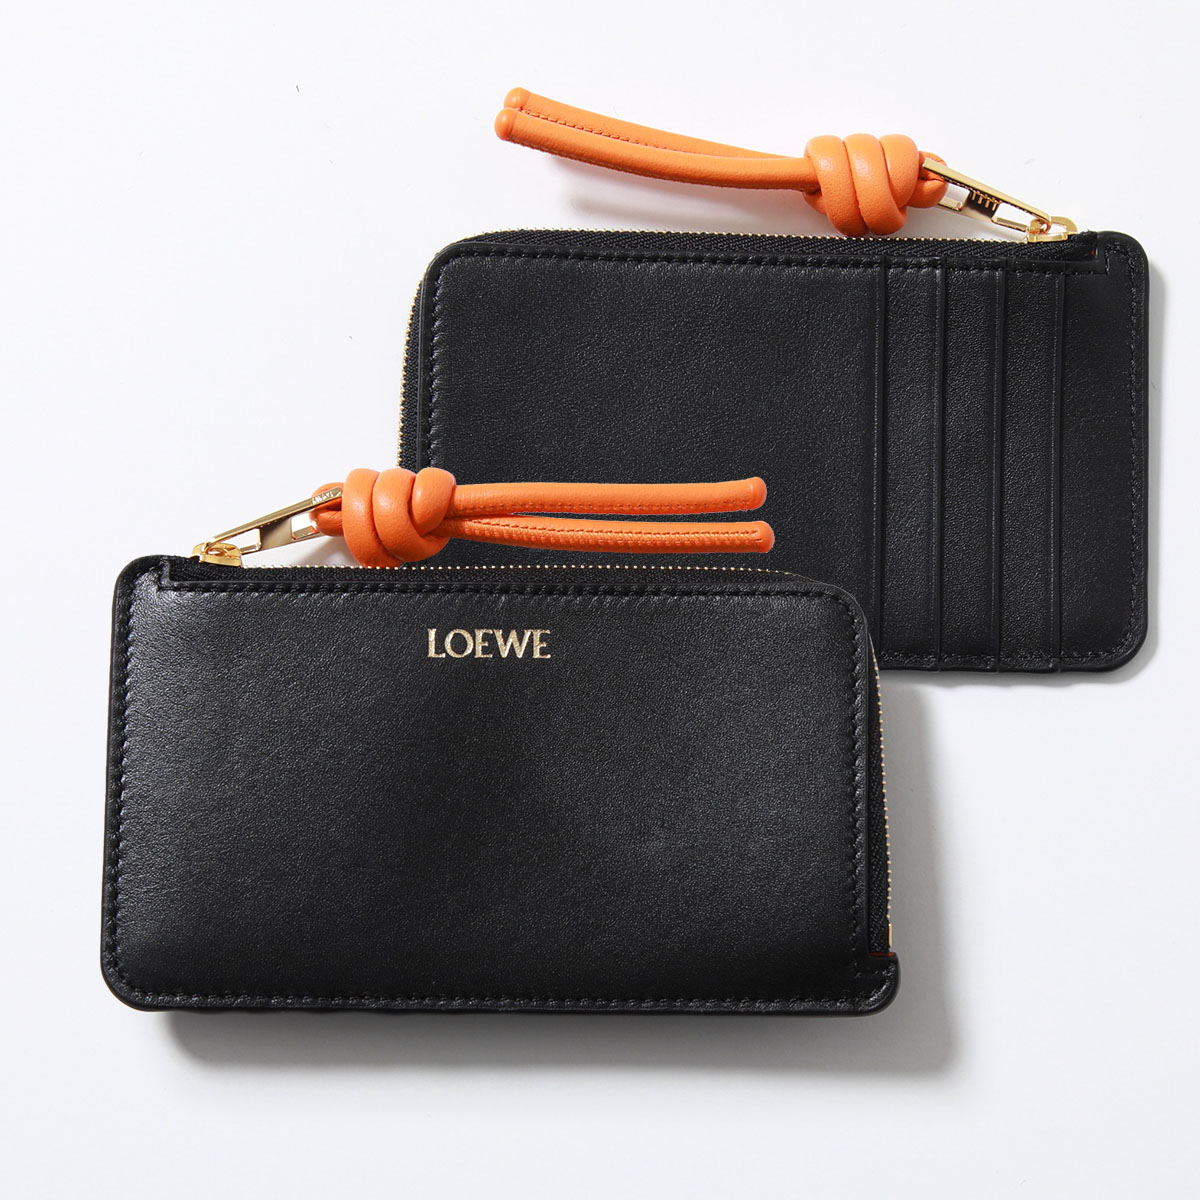 LOEWE フラグメントケース KNOT COIN CARDHOLDER ノット CEM1Z40X0...